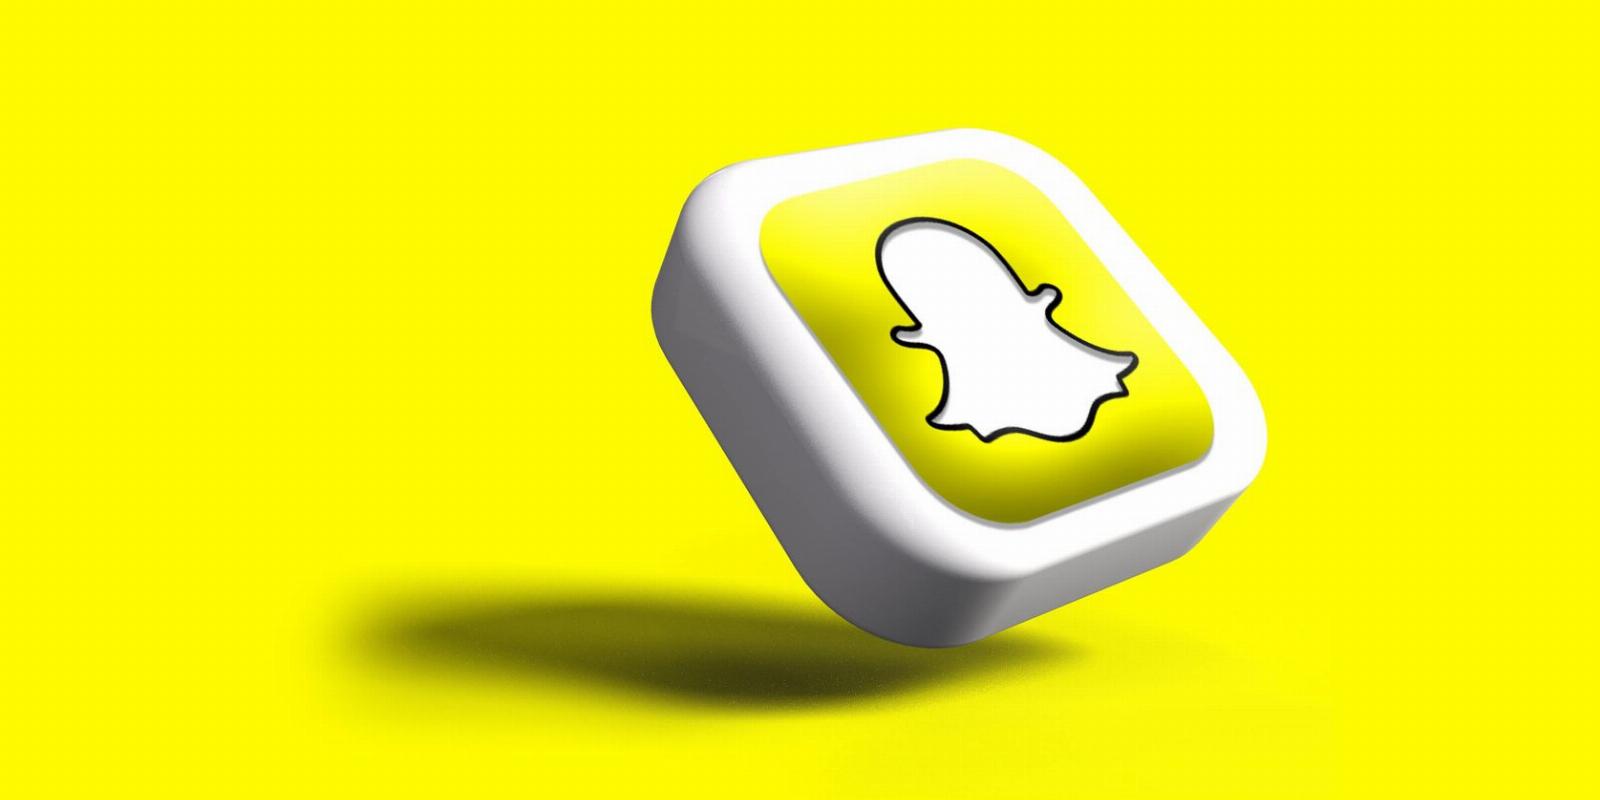 Snapchat’s New Sounds Features Make Creating Content Easier